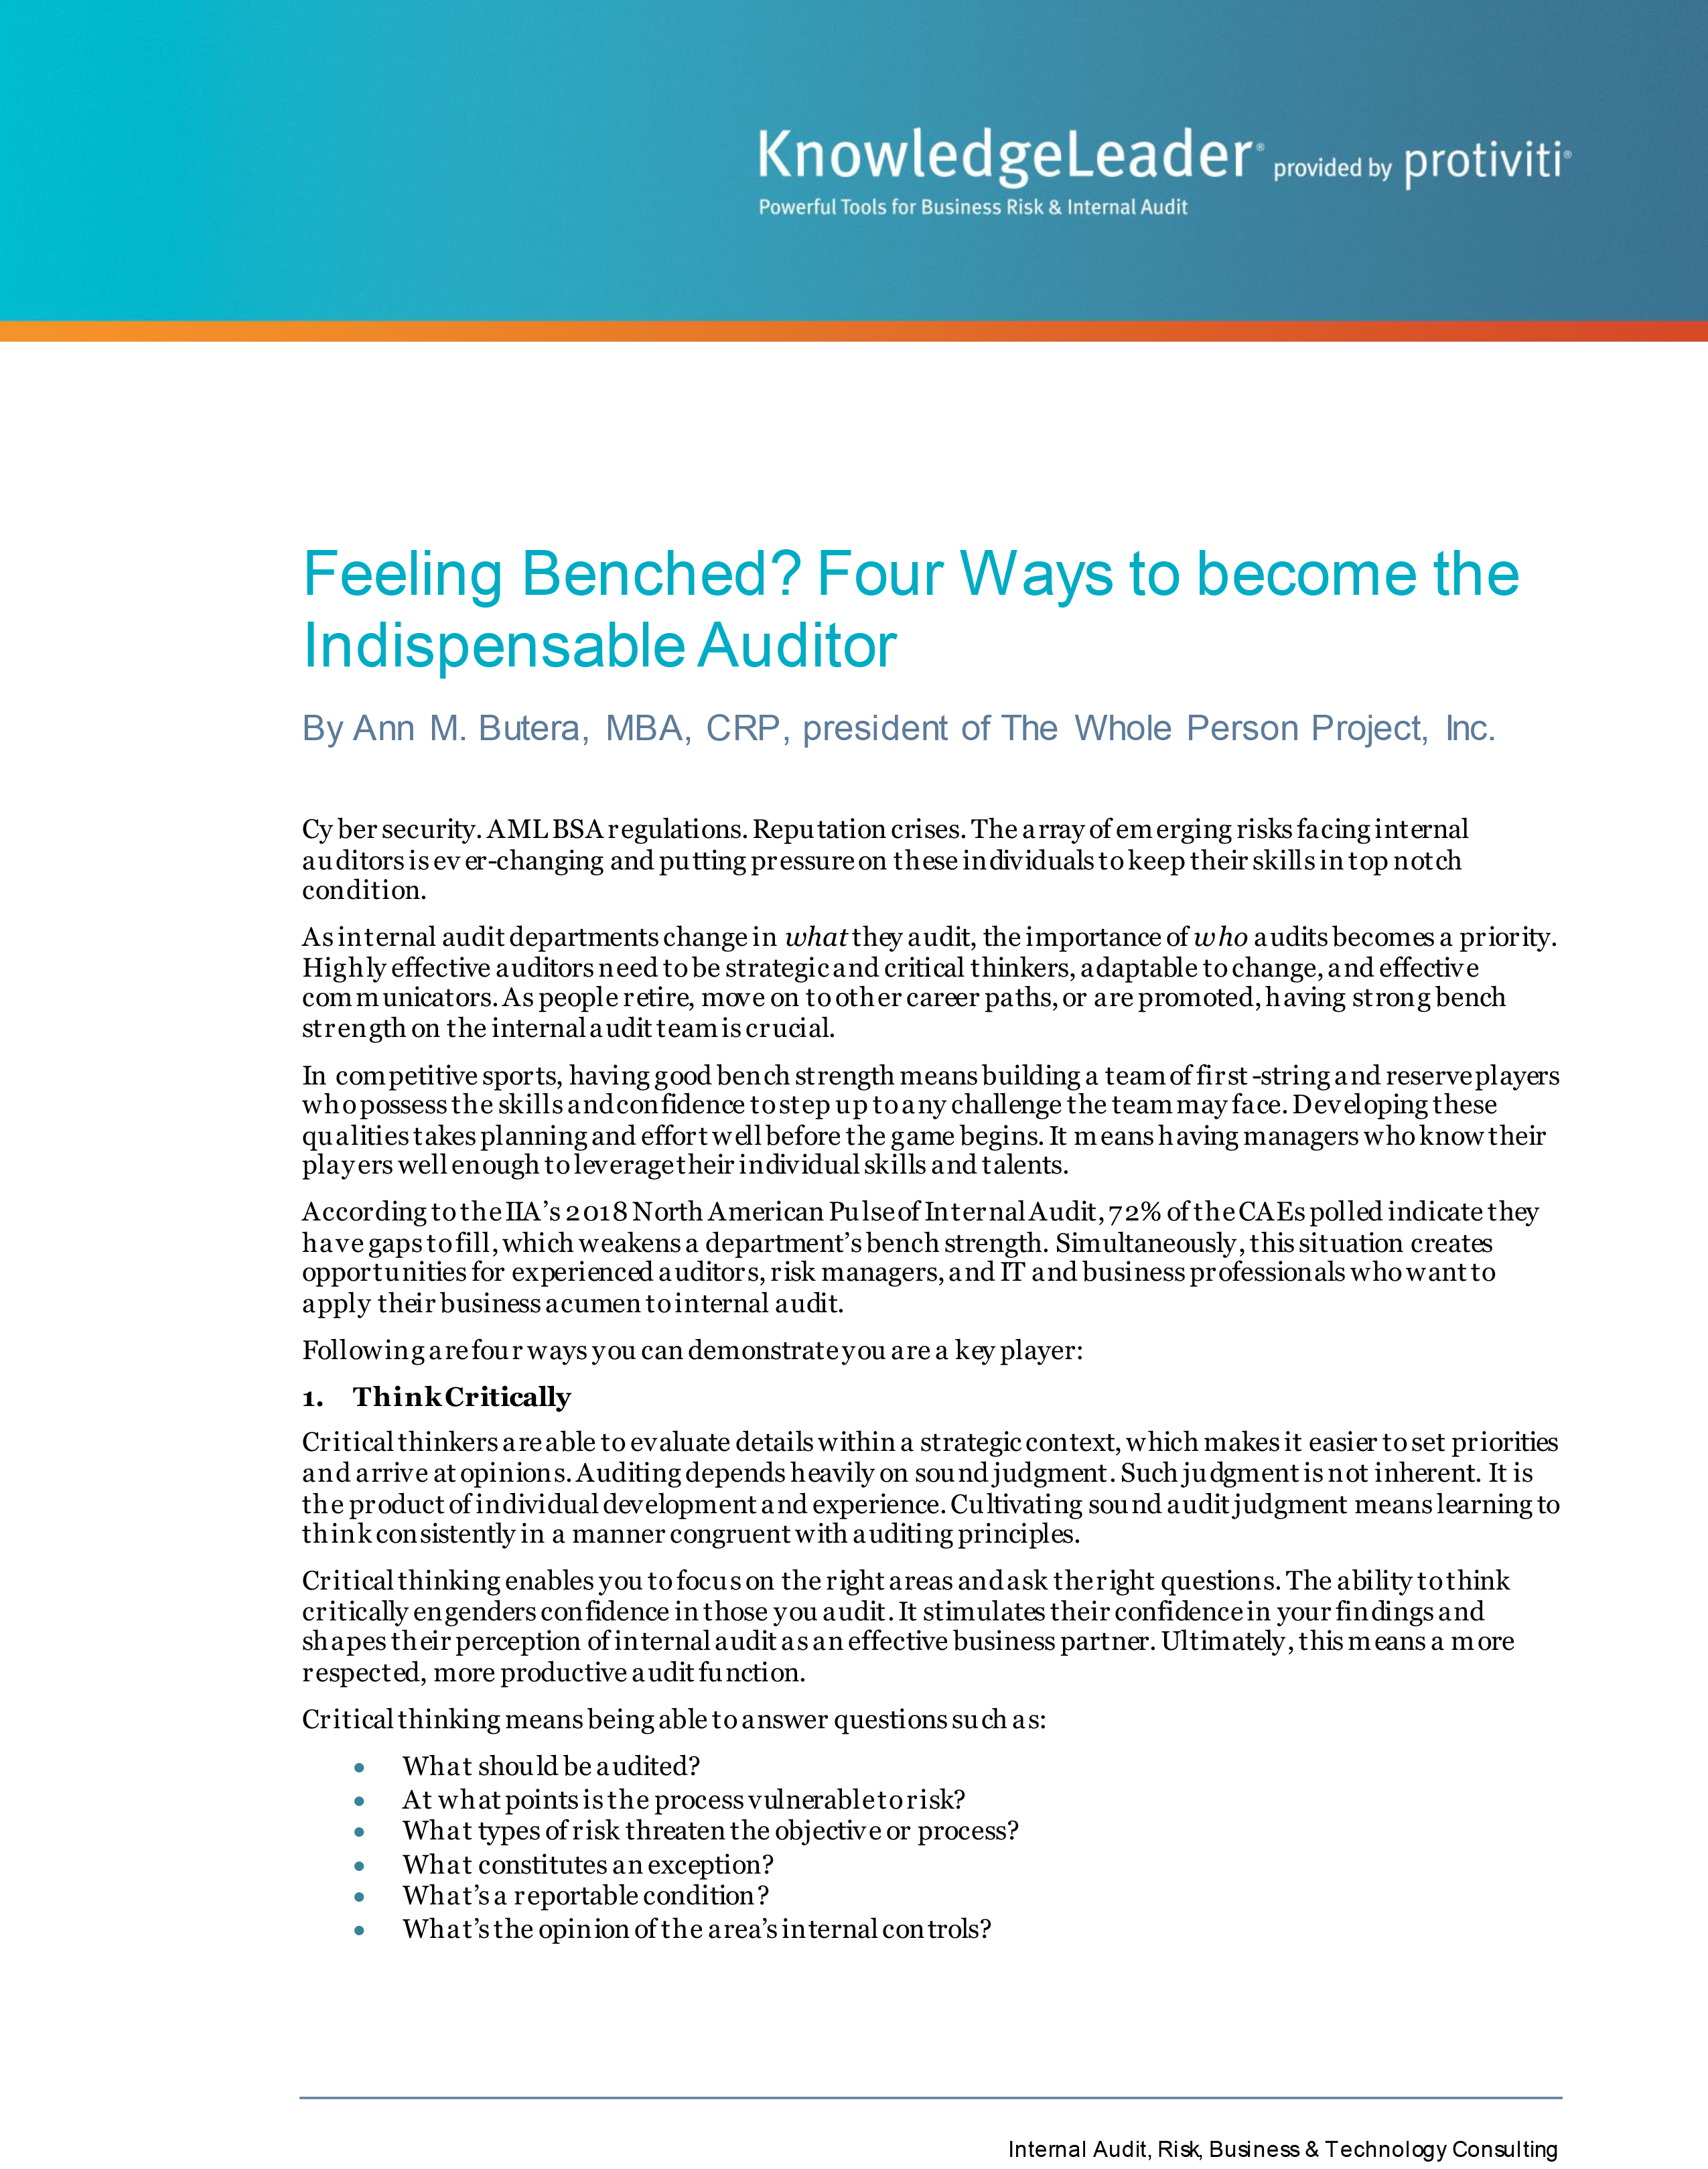 Screenshot of the first page of Feeling Benched - Four Ways to Become the Indispensable Auditor